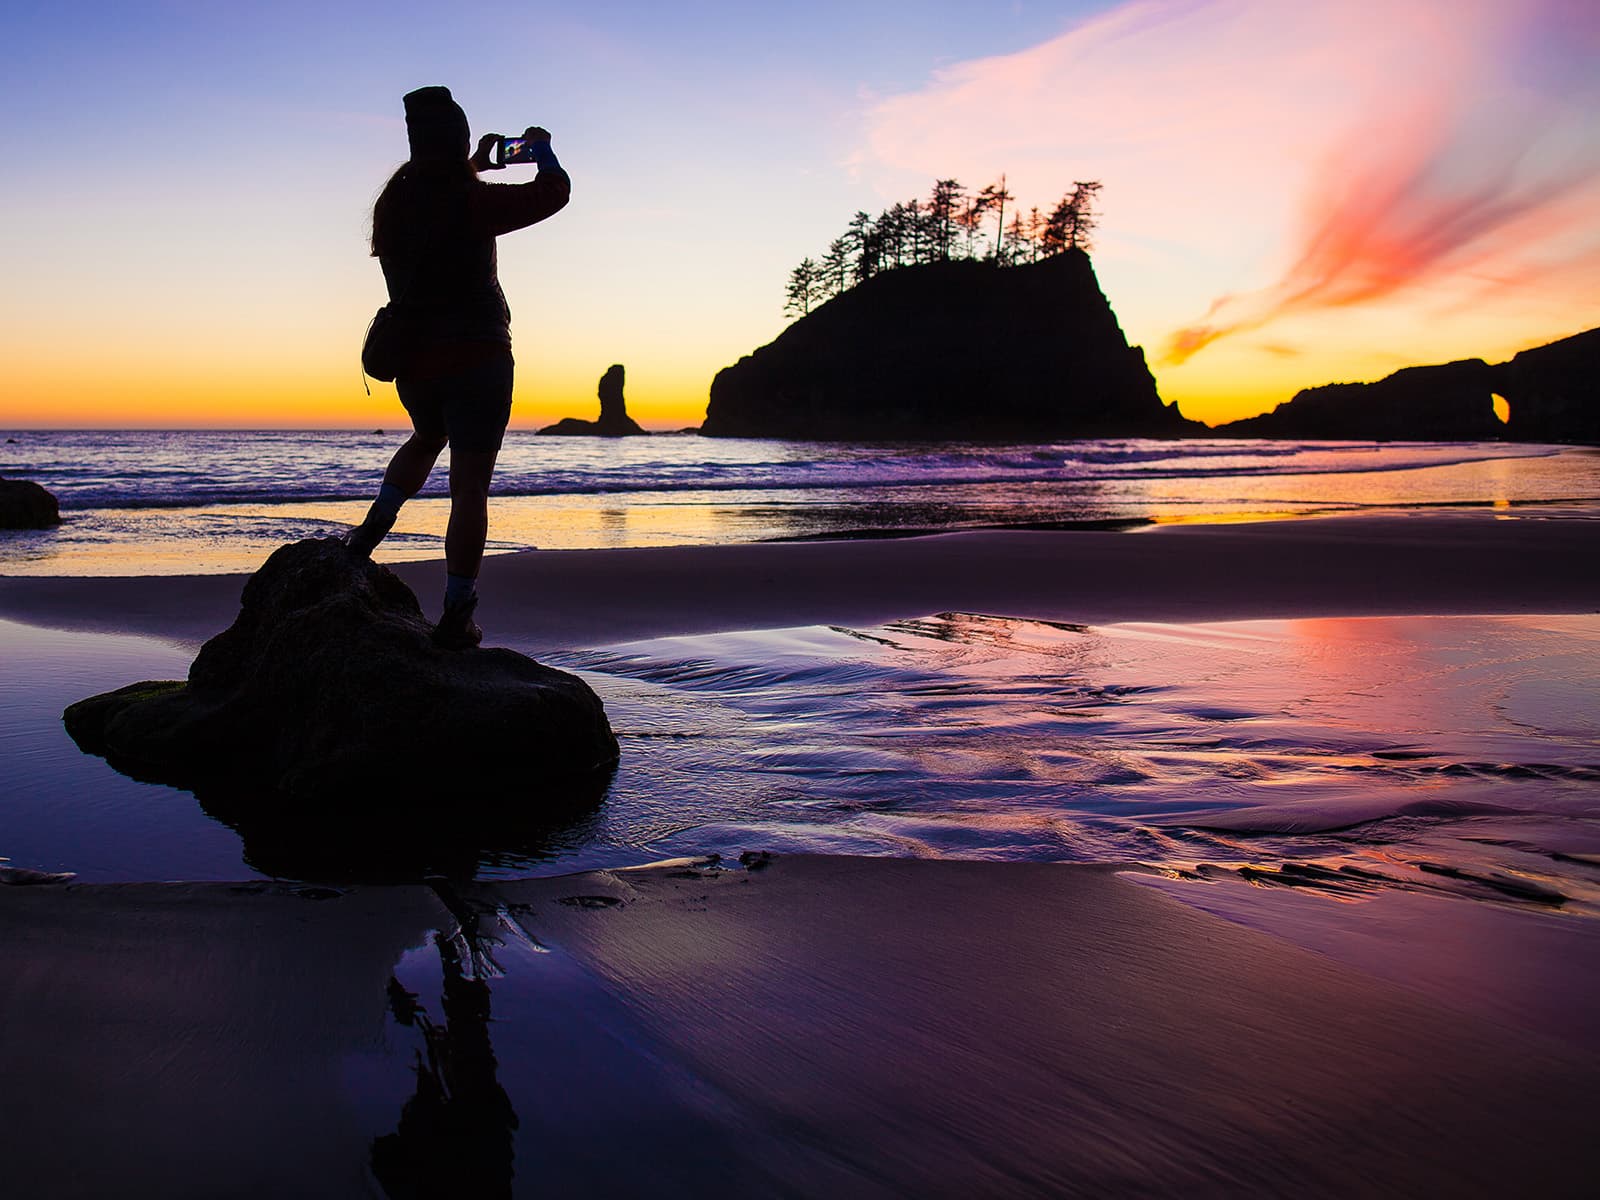 A woman photographing the sunset at the beach